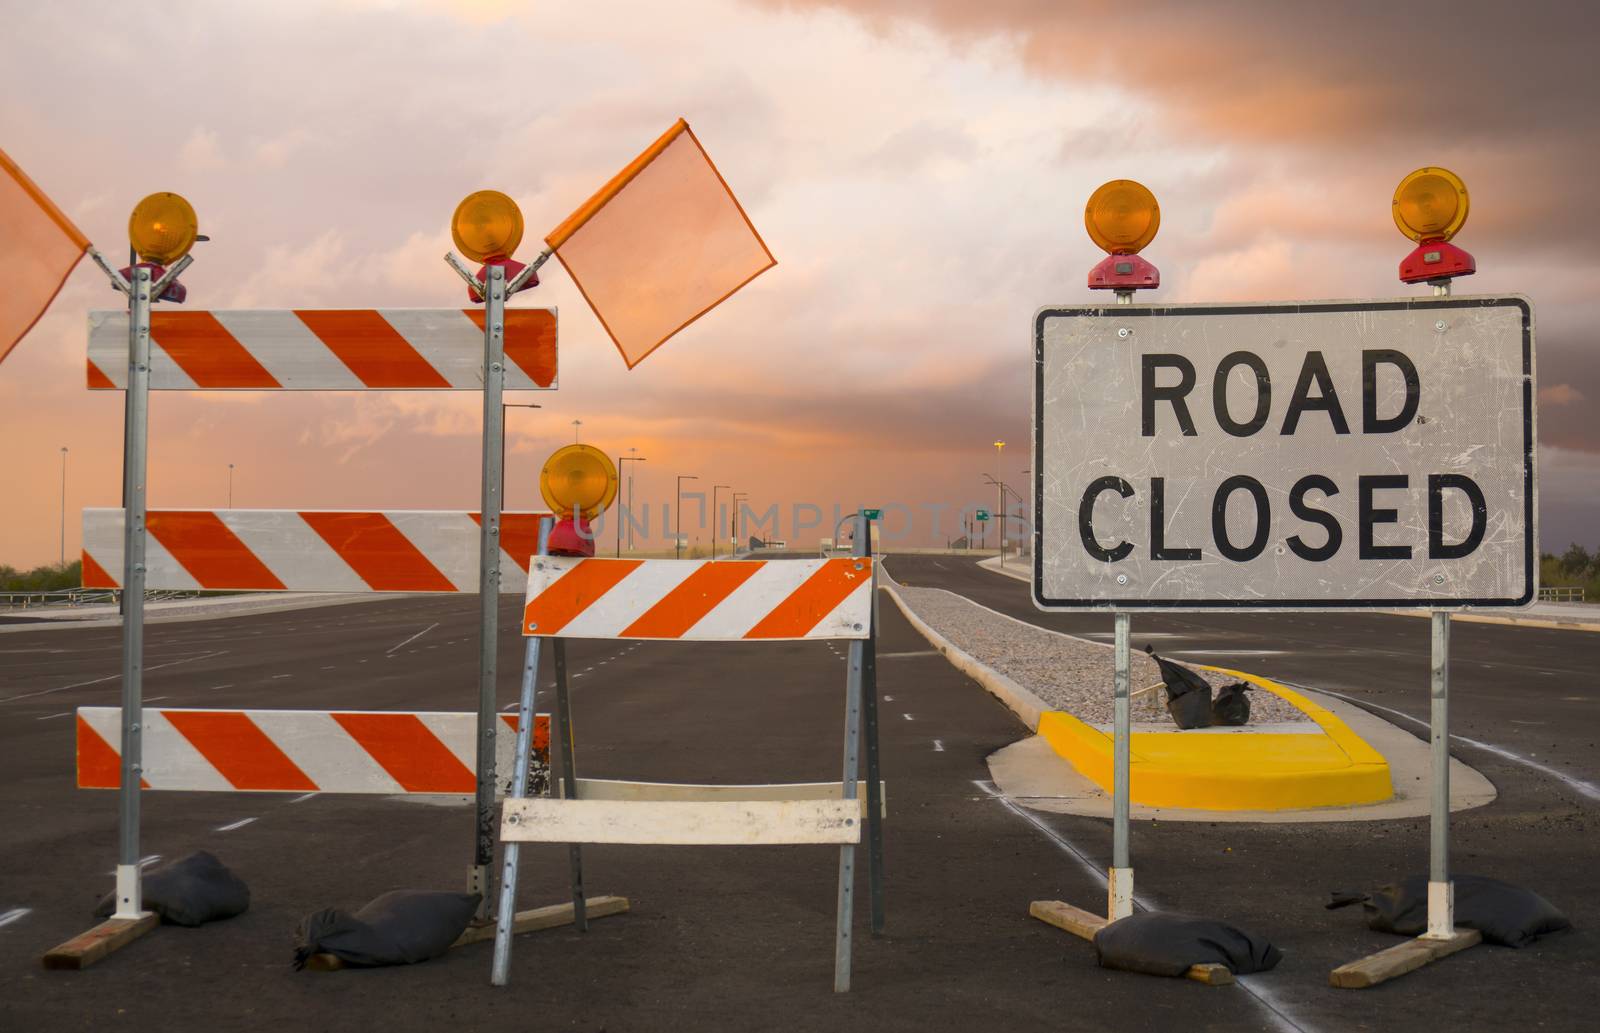 Road closed sign - new highway exit entrance by Paulmatthewphoto